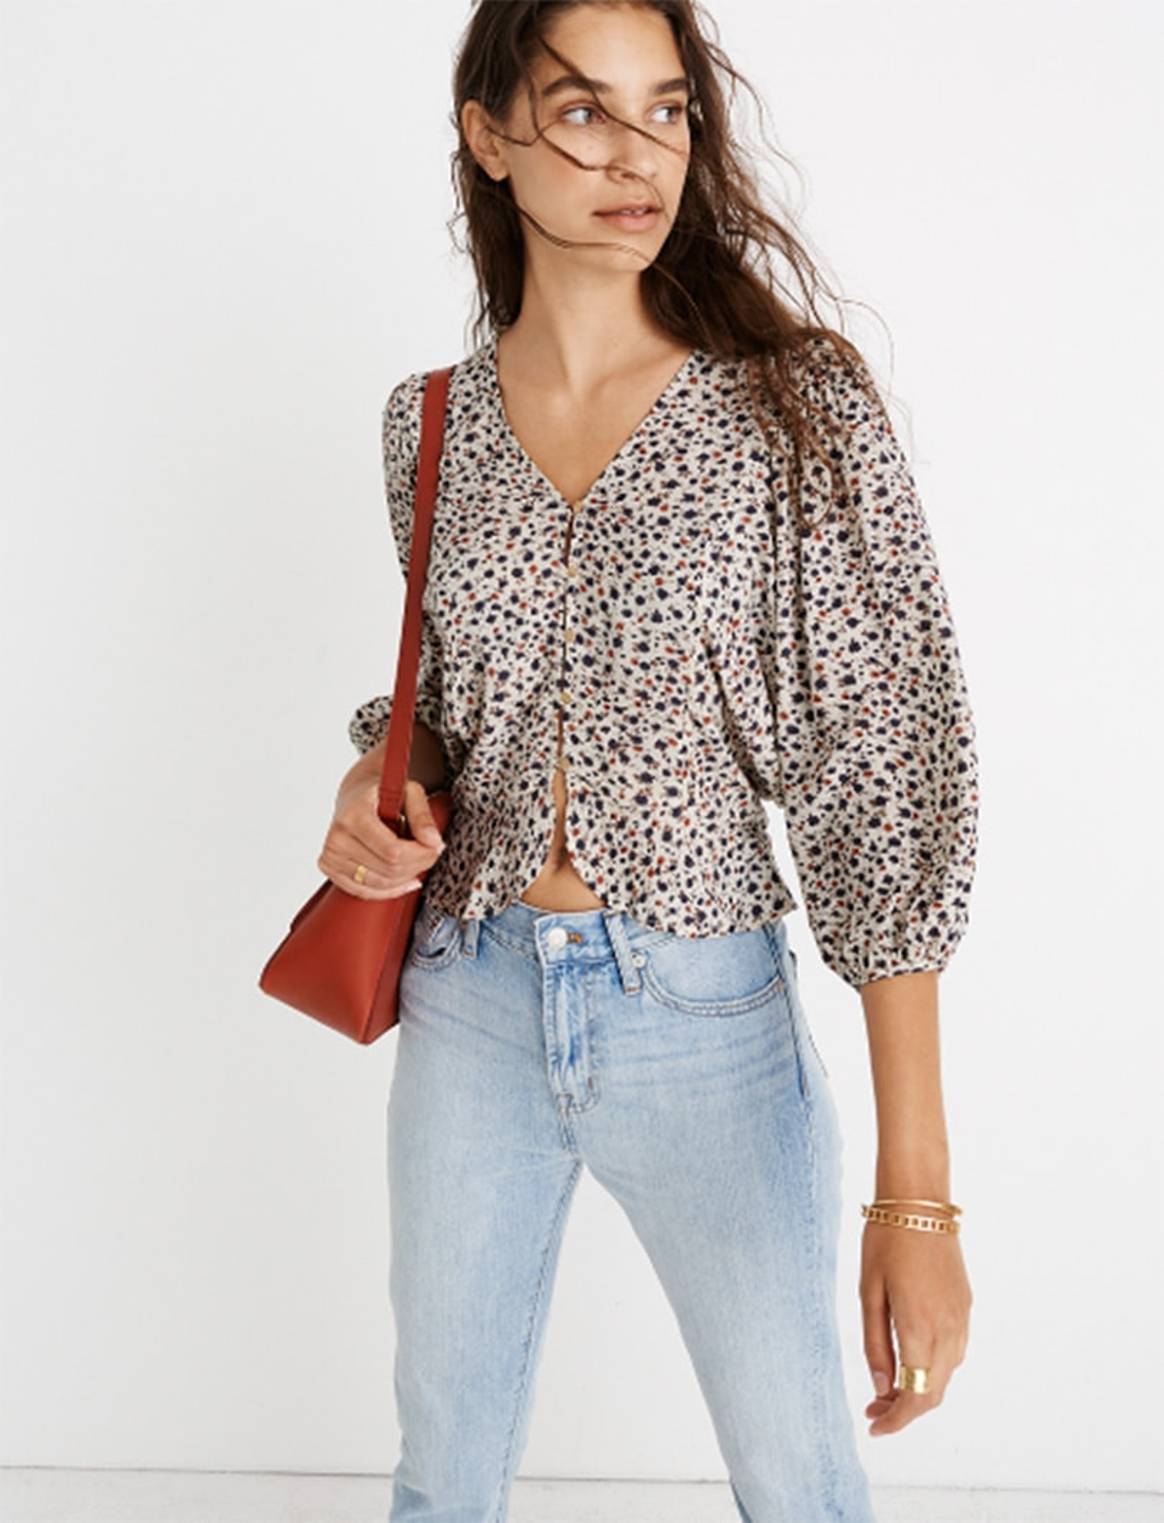 Madewell launches exclusive collection with California brand Christy Dawn